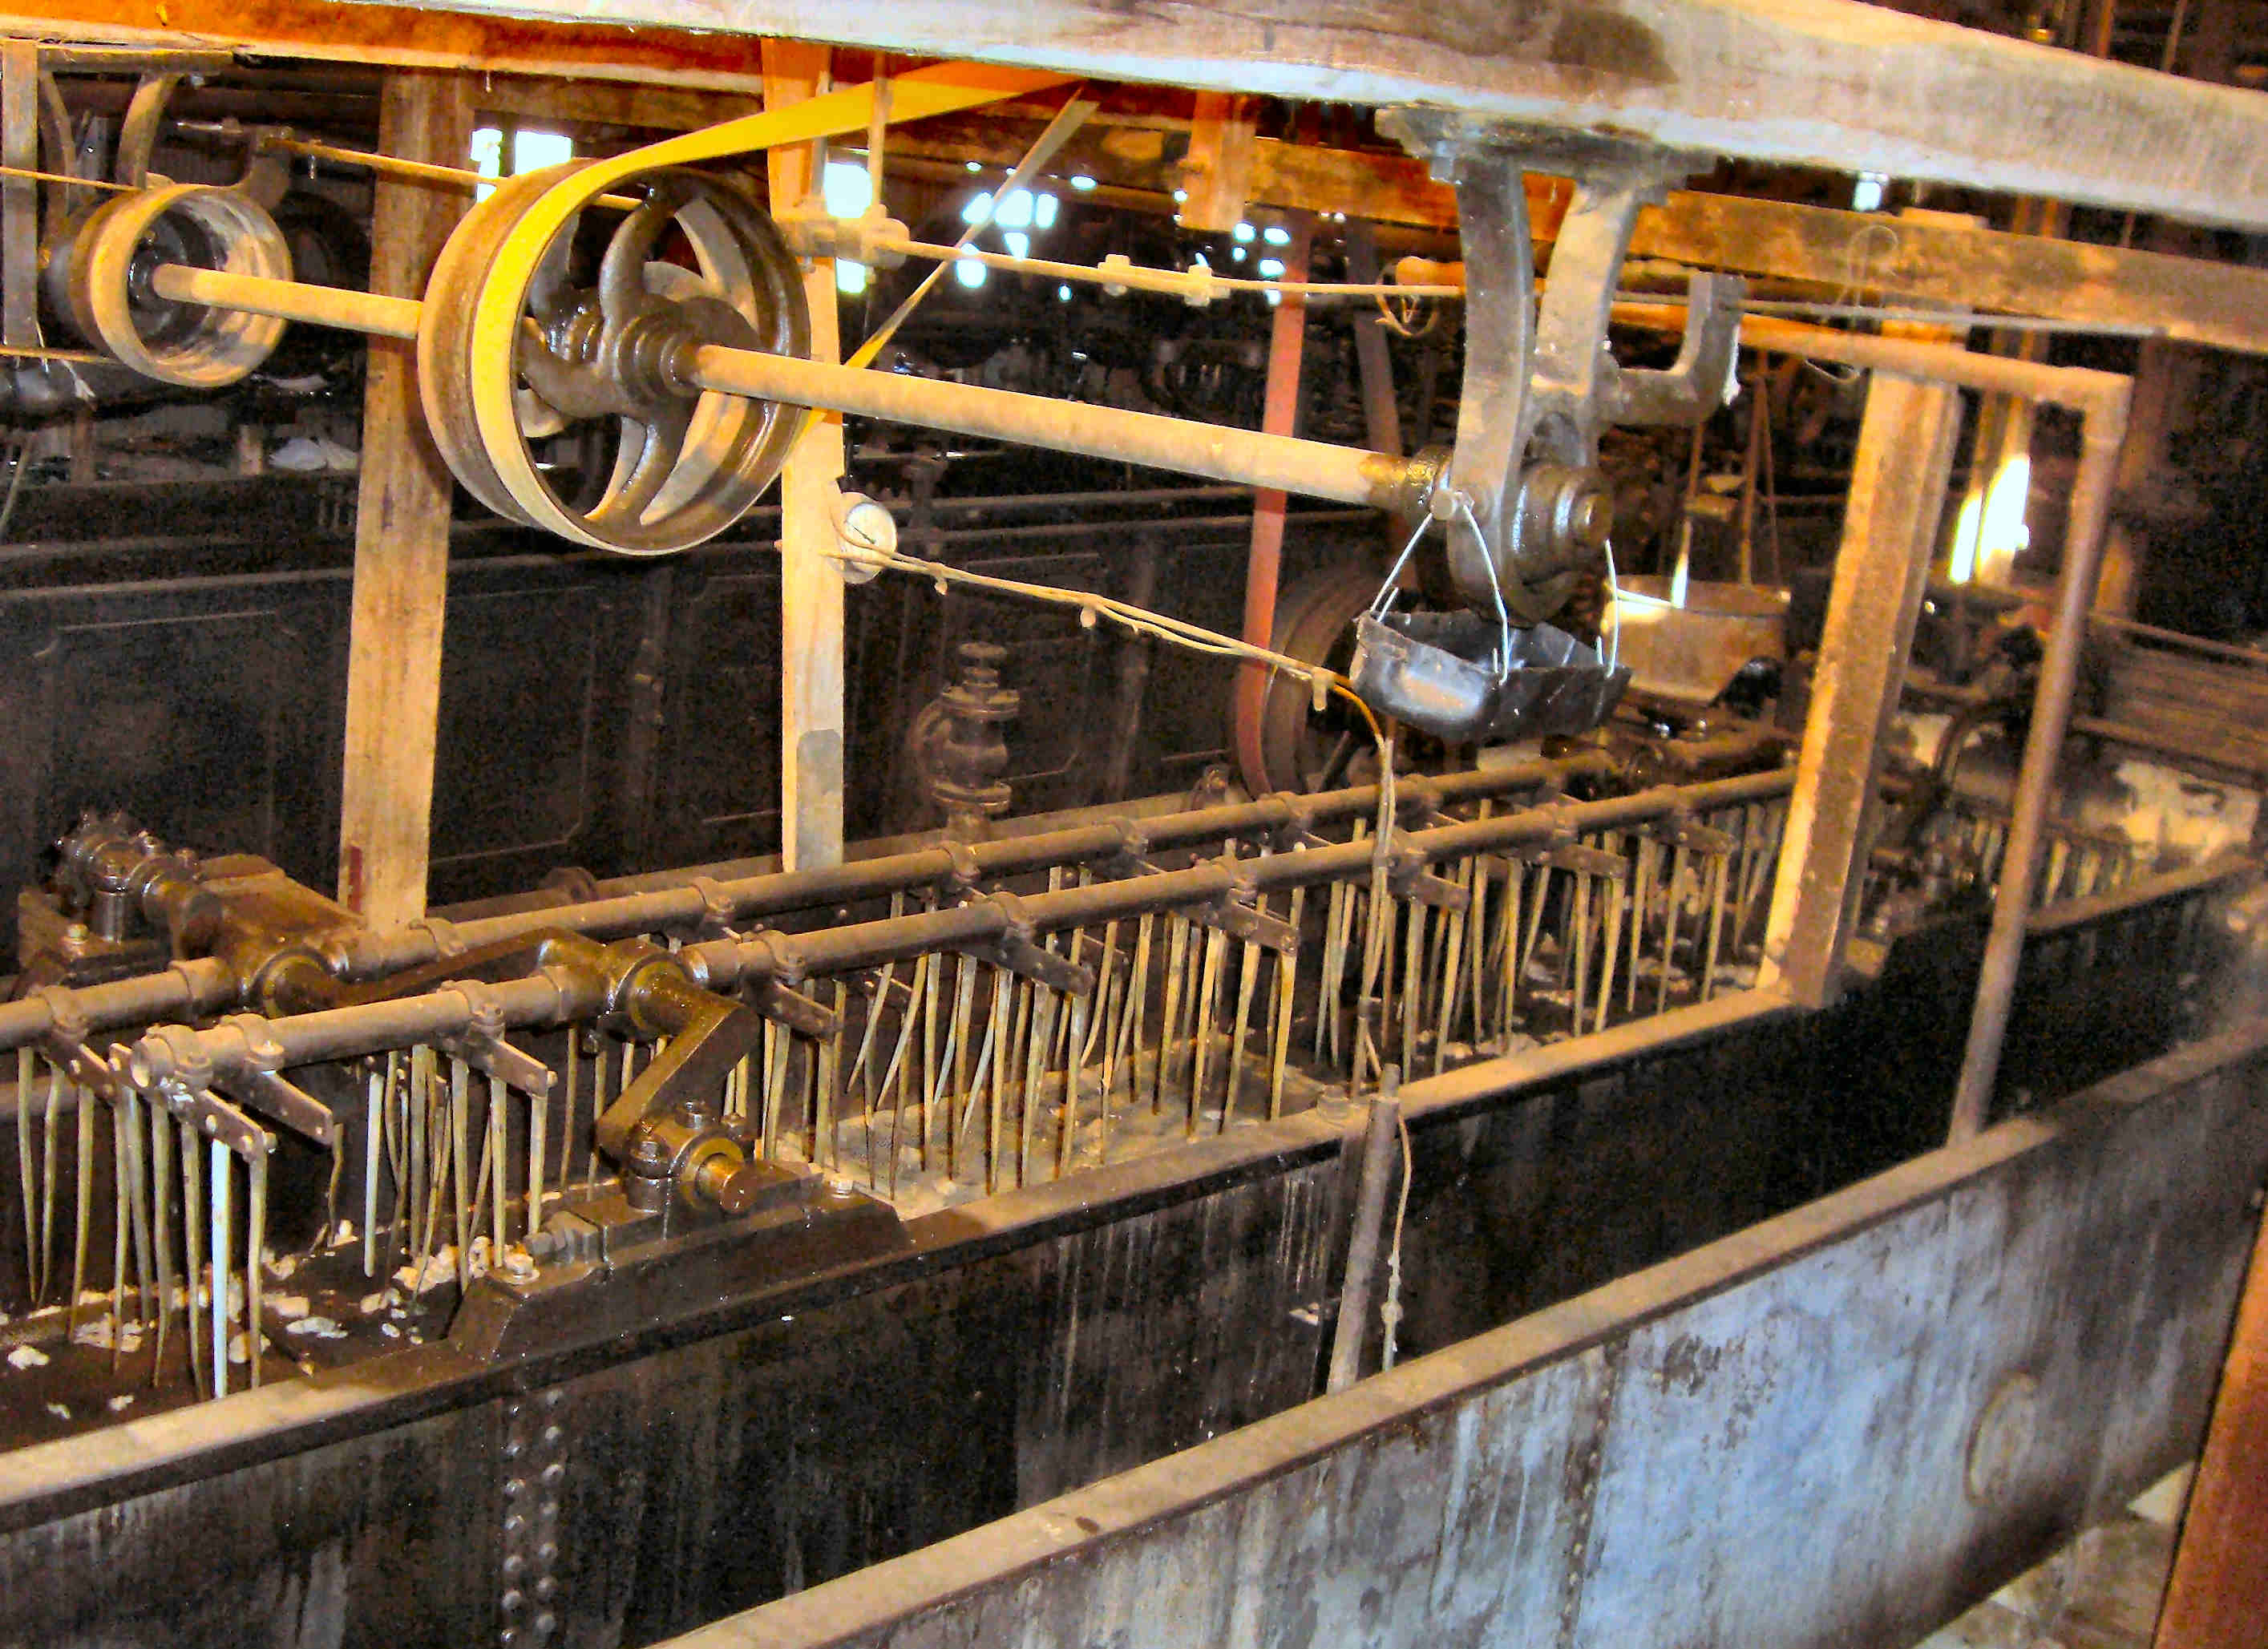 The wool scour machinery